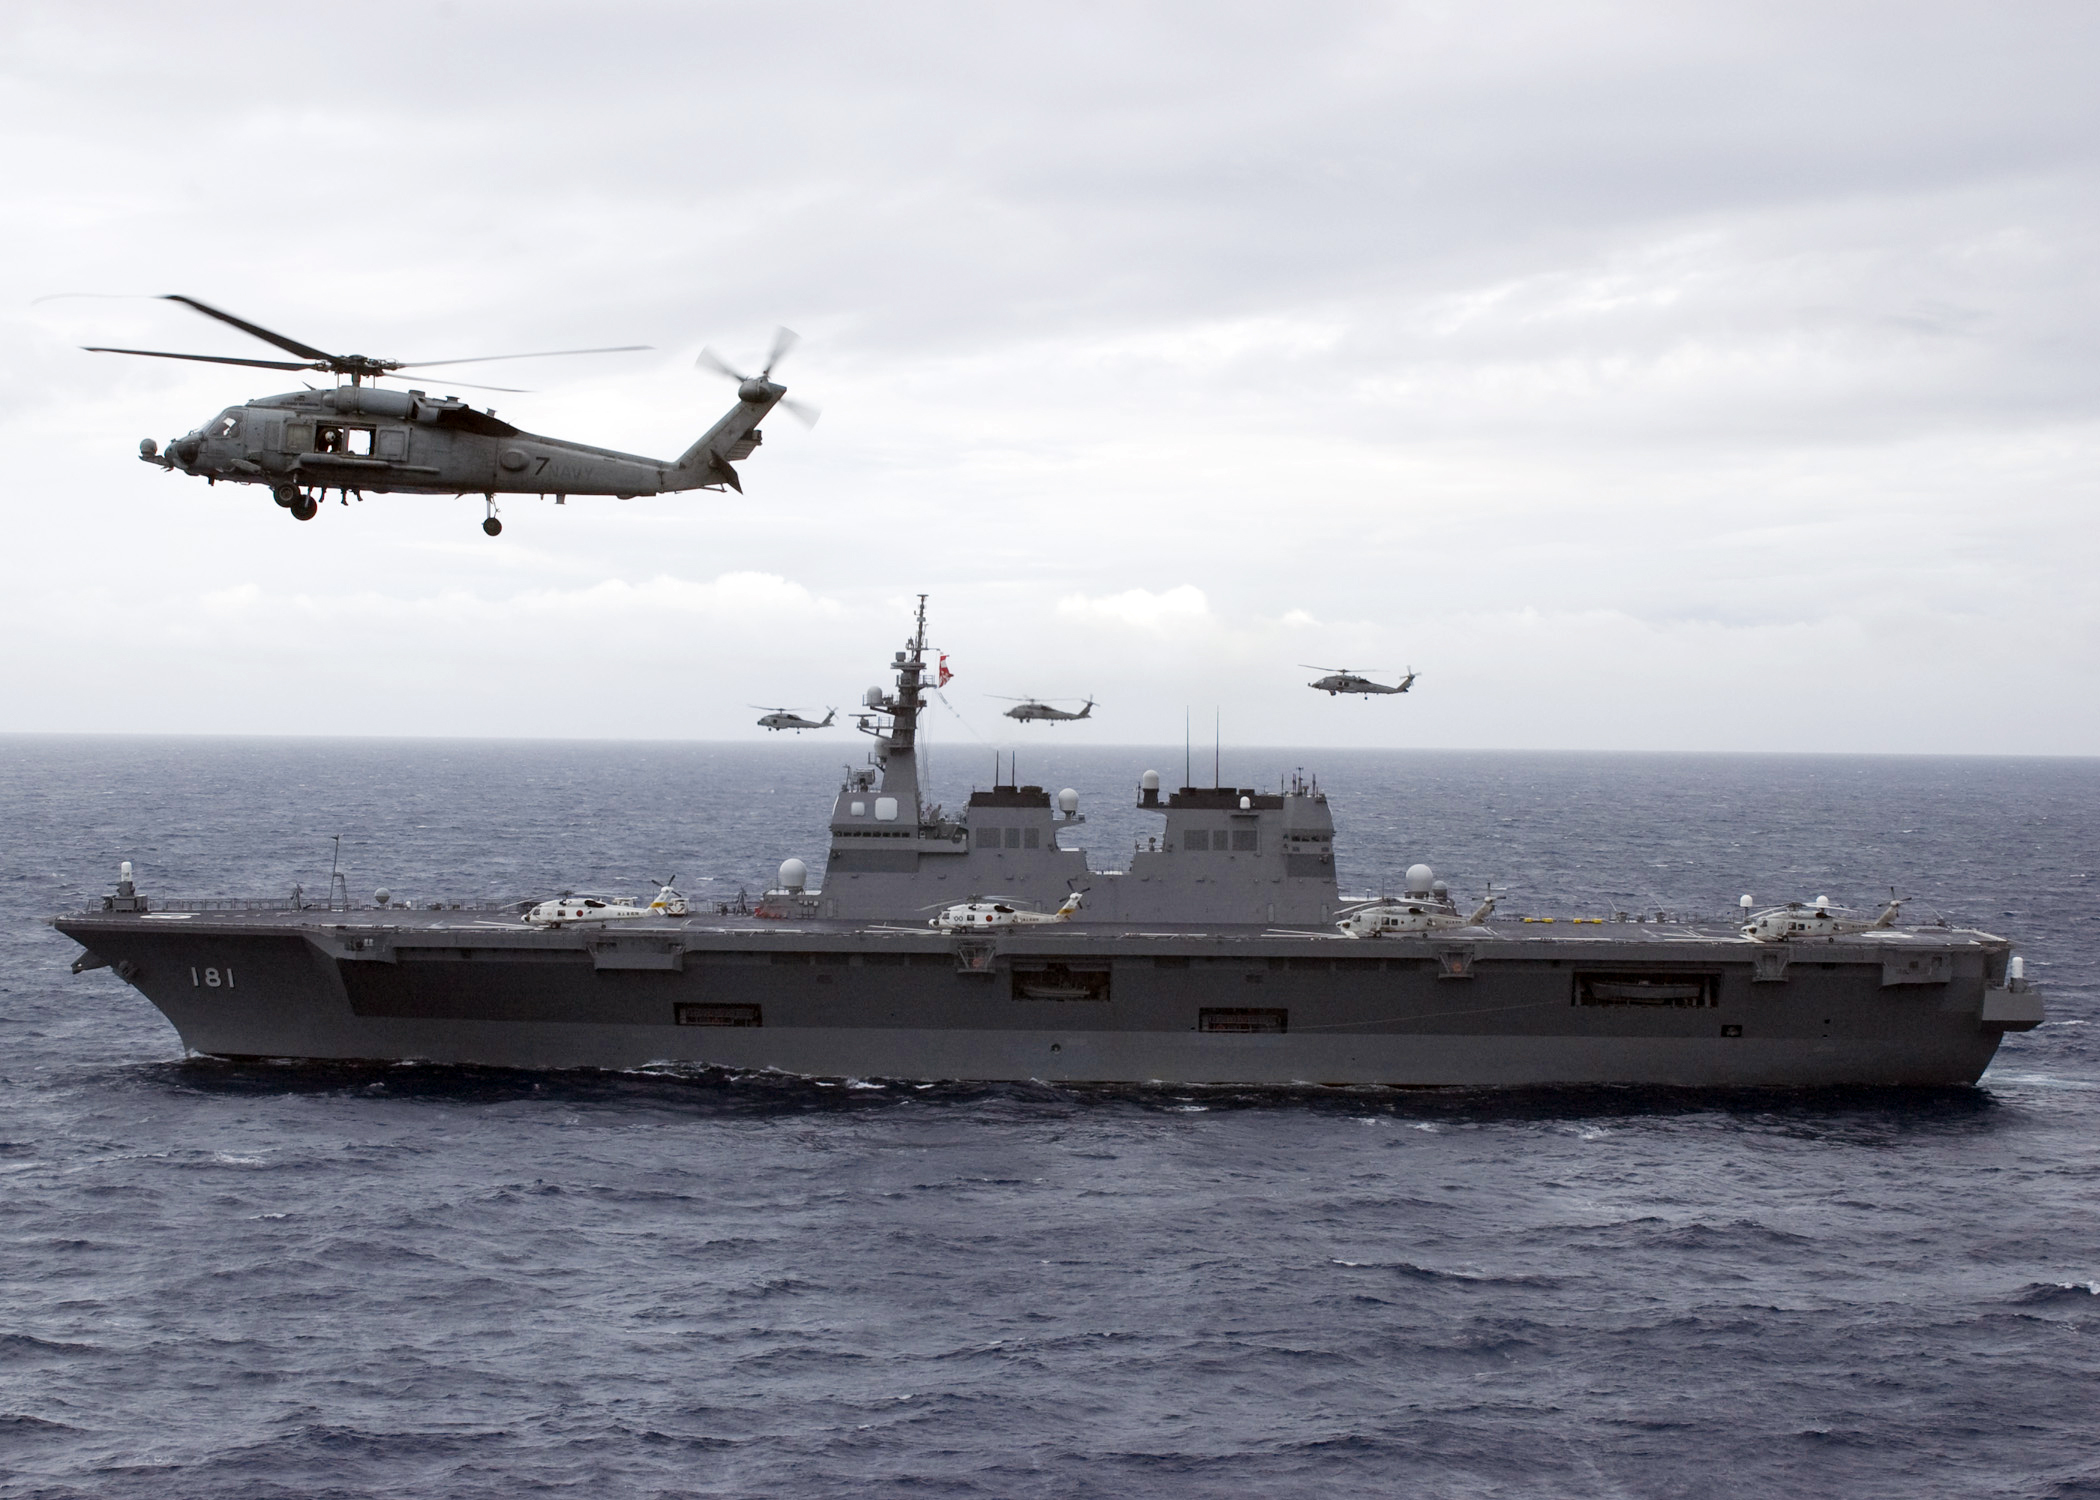 Helicopter_carrier_Hy%C5%ABga_%2816DDH%29.jpg